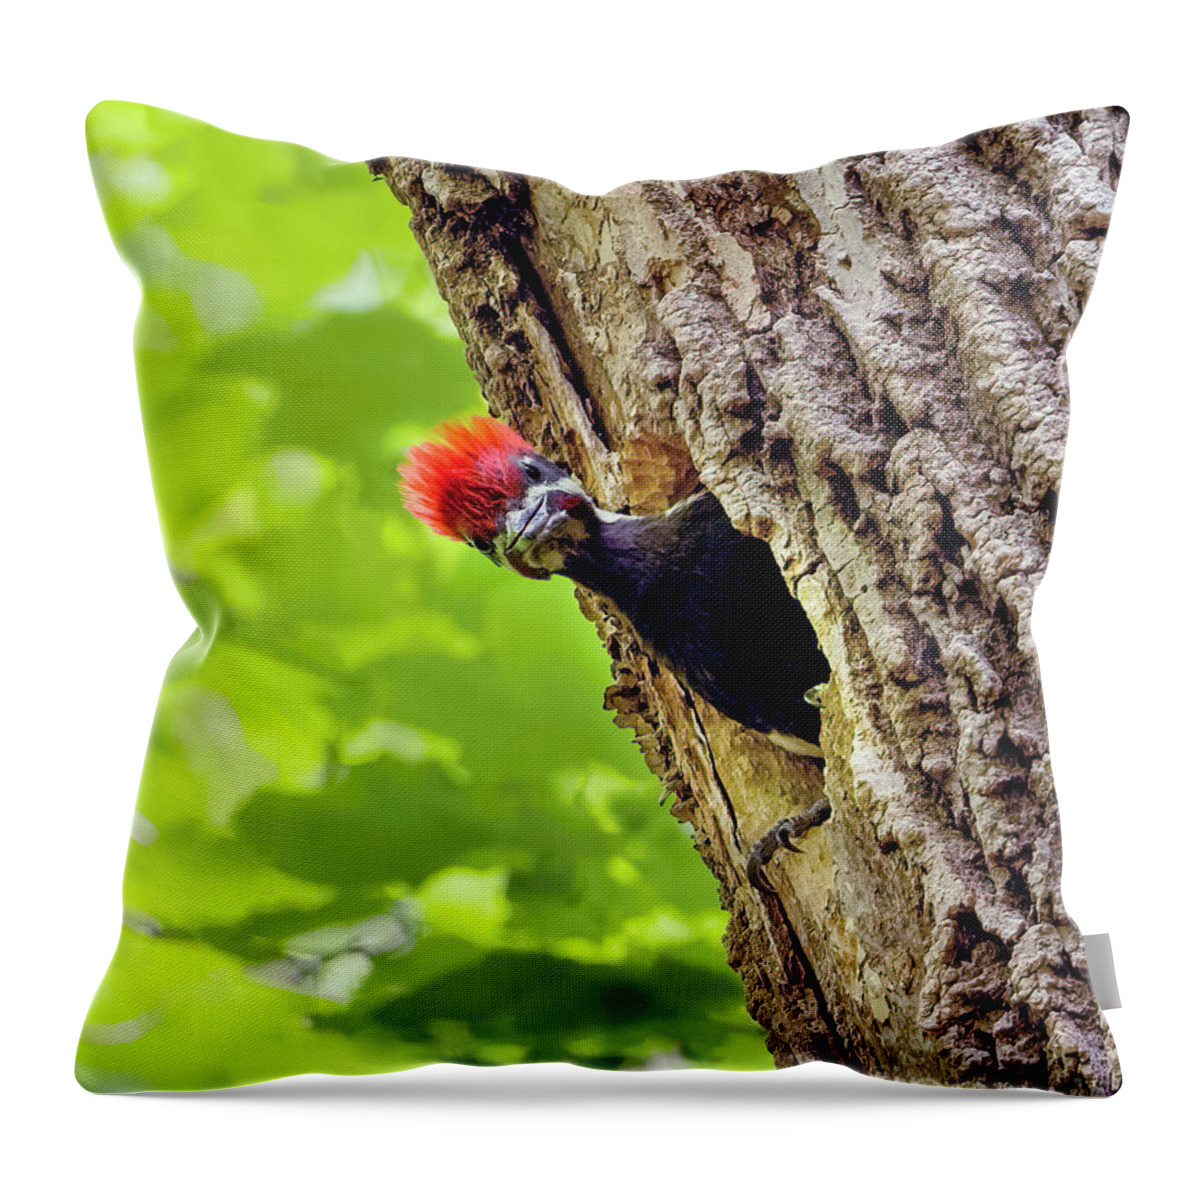 Pileated Woodpecker Chick Throw Pillow featuring the photograph Pileated Woodpecker Chick by Sandra Rust